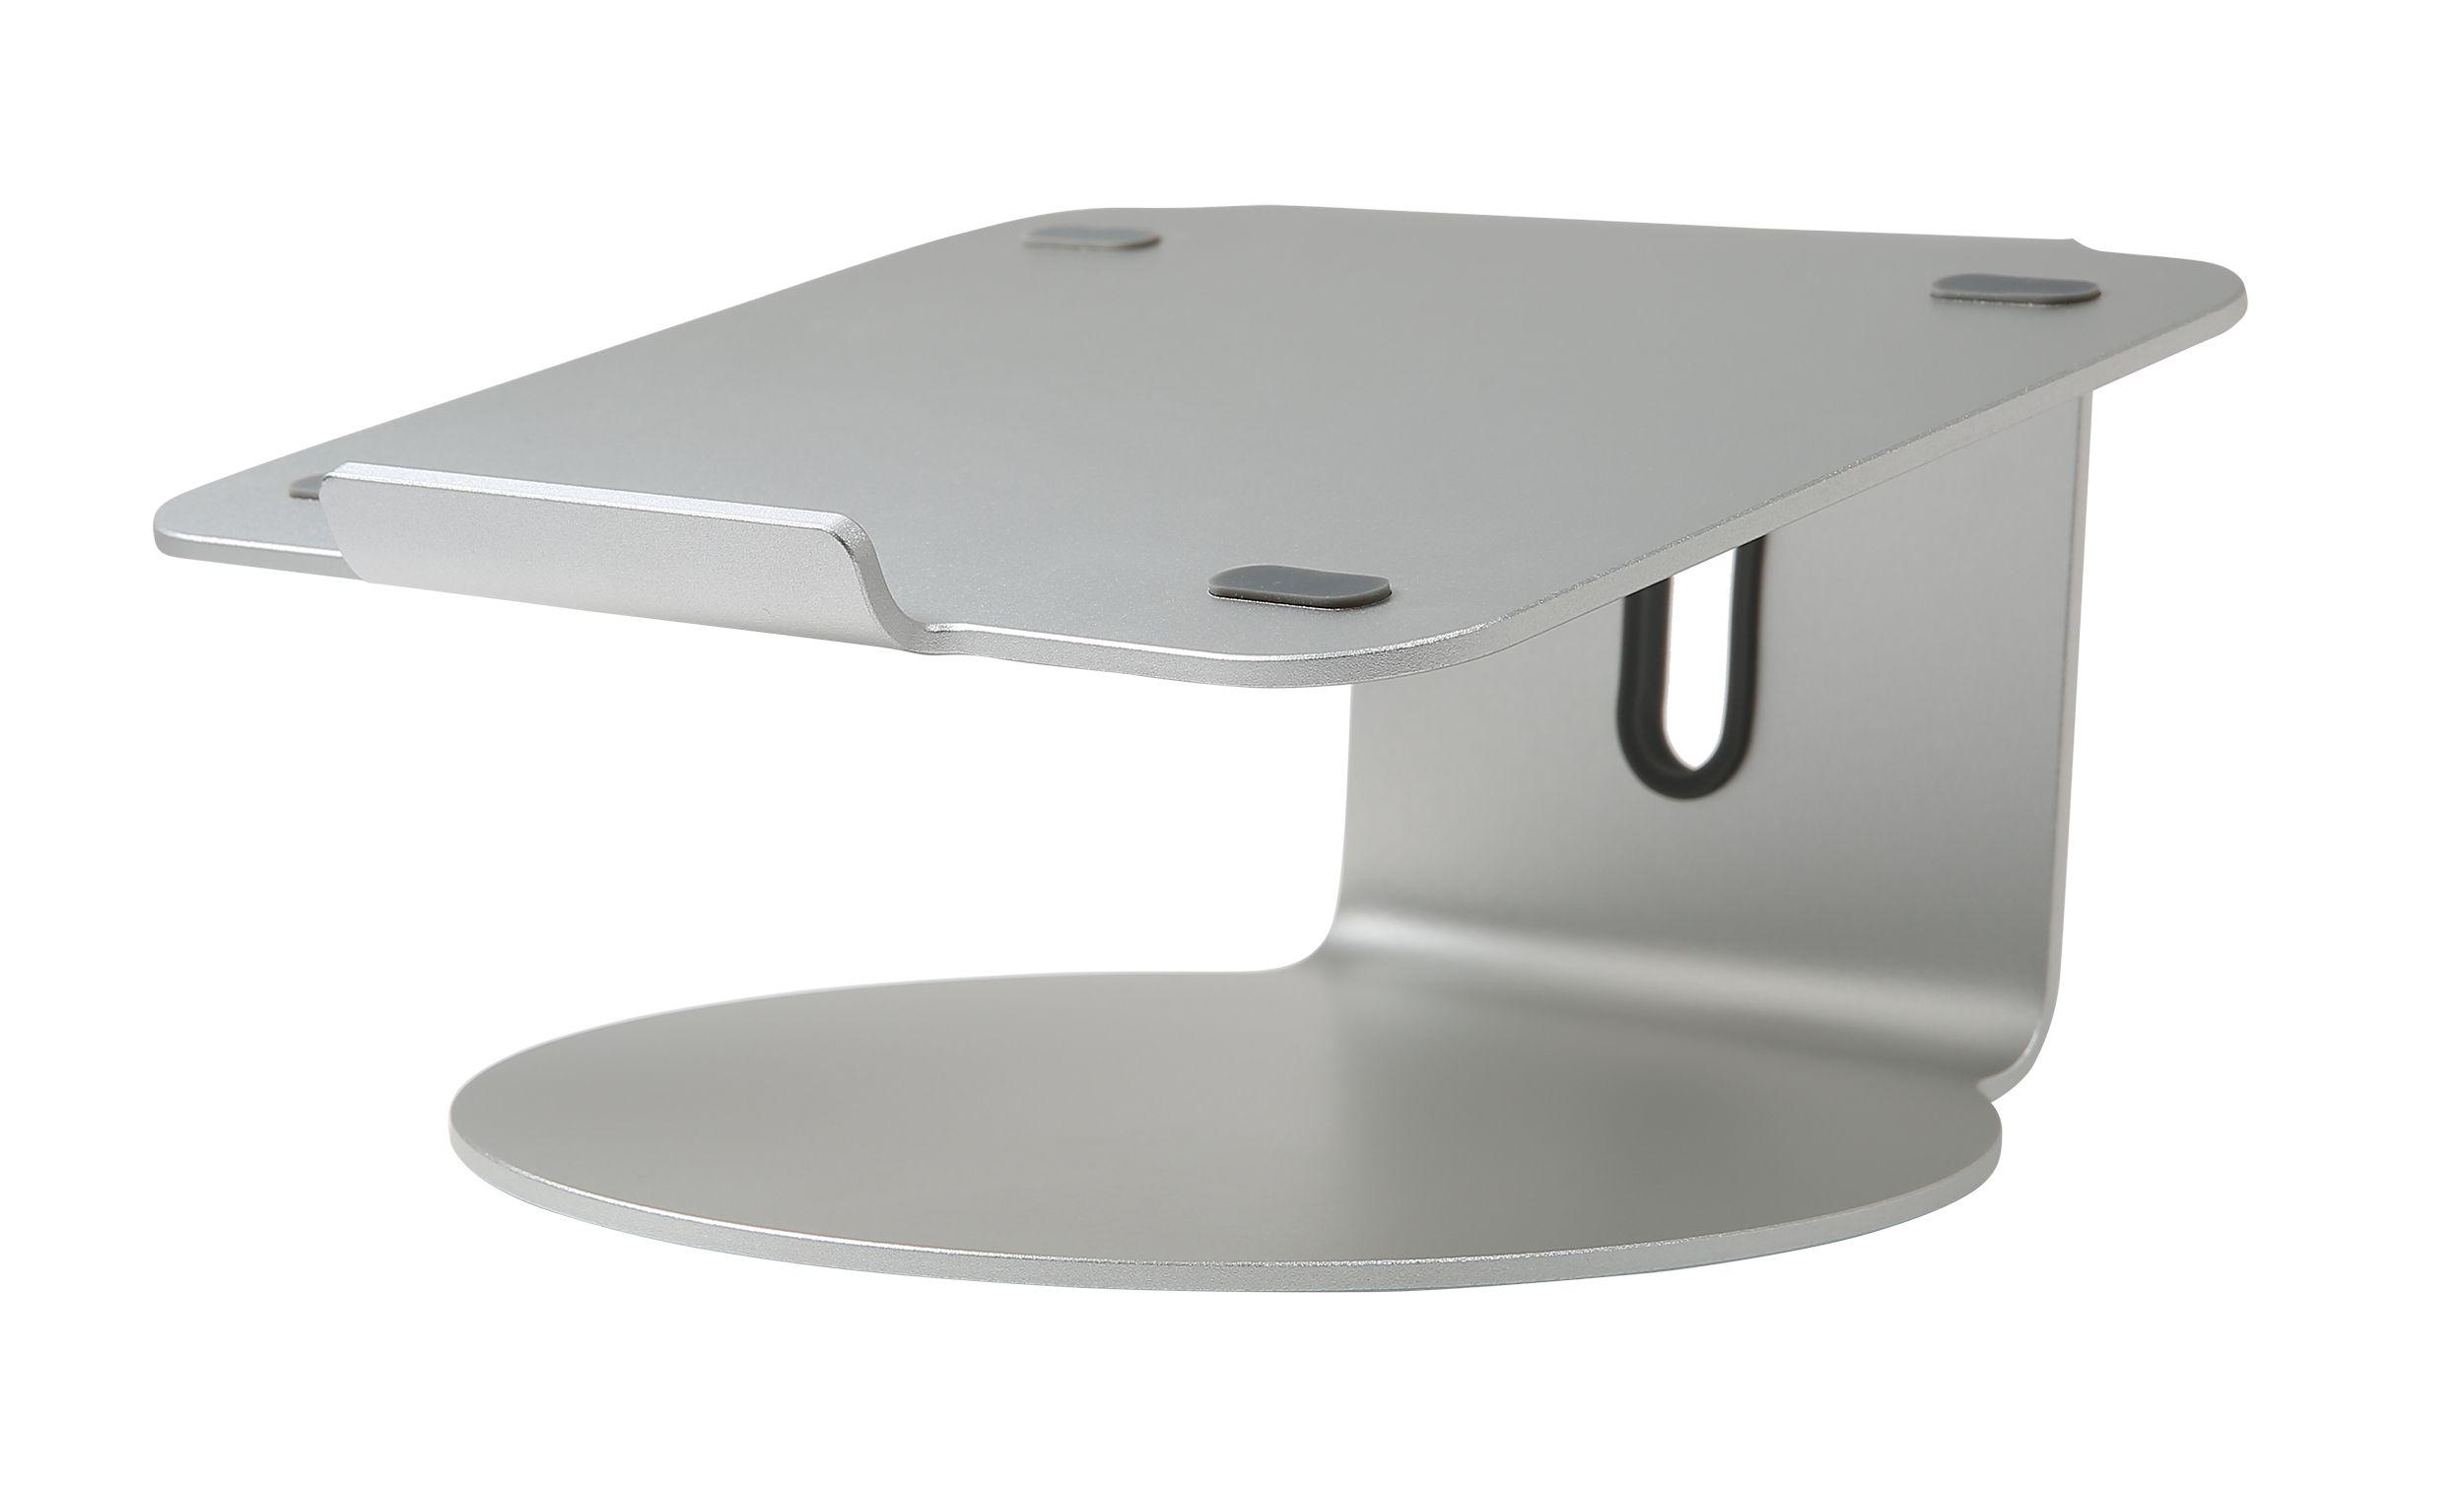 Aluminium laptop stand POUT EYES 4 silver